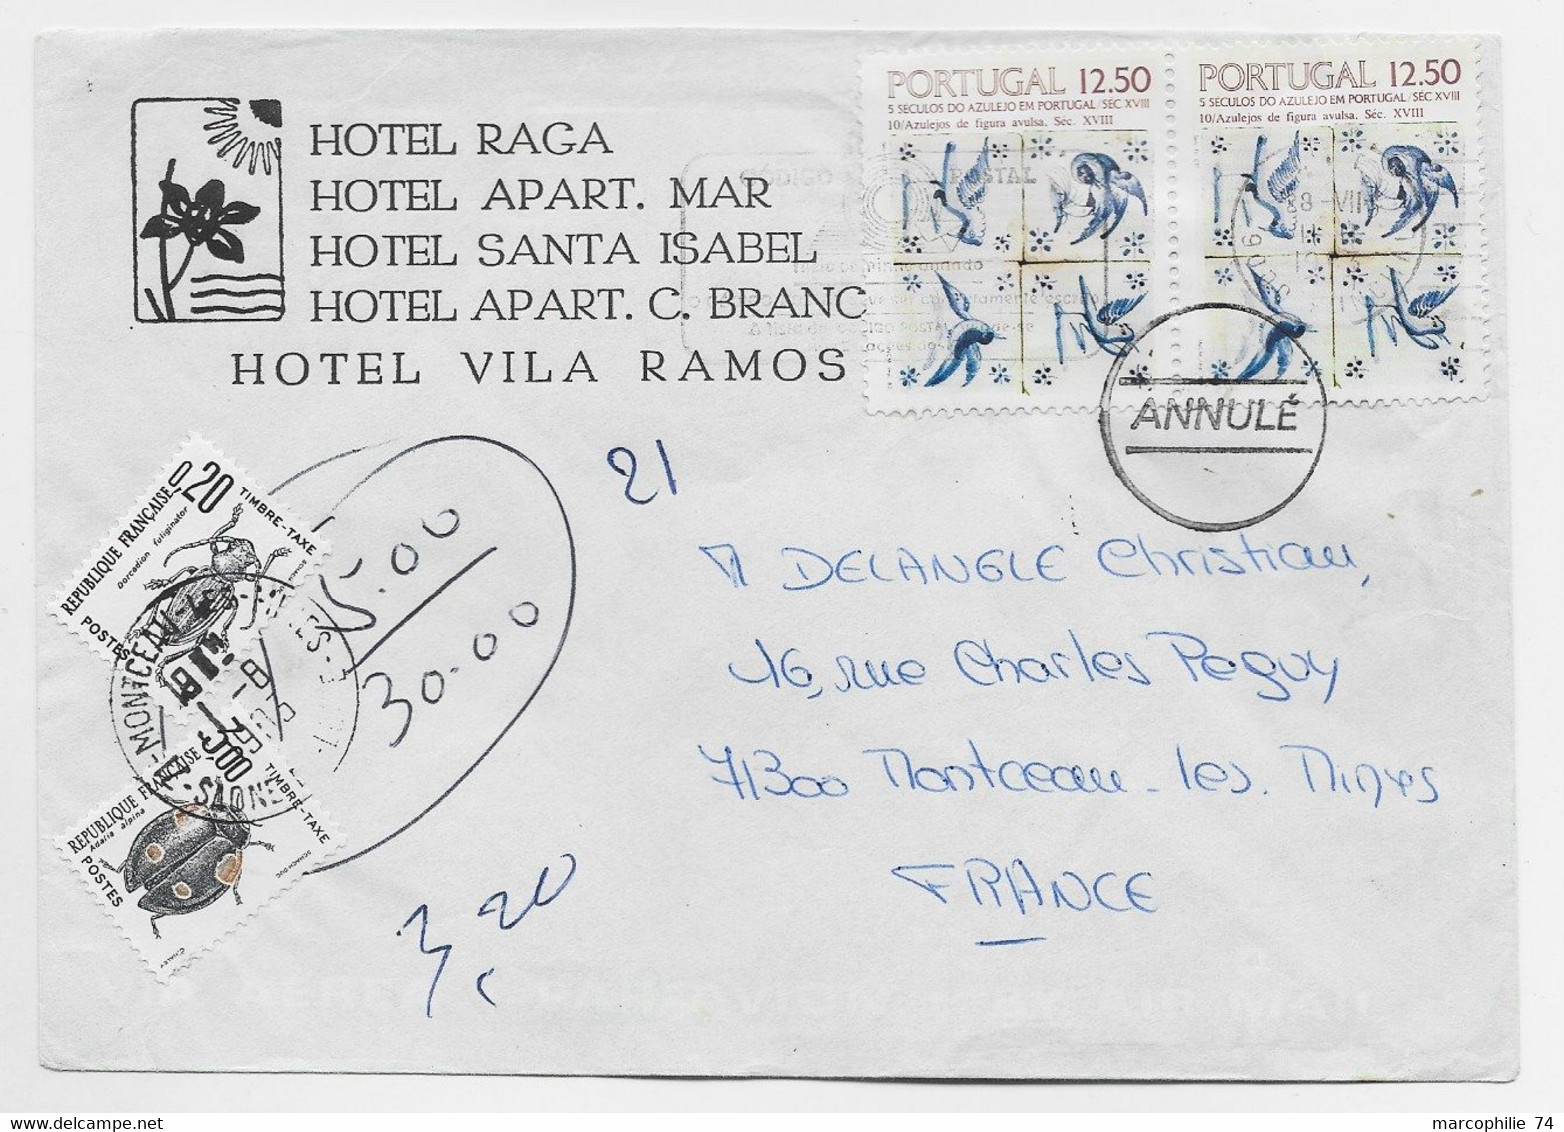 PORTUGAL 12.50 FIGURA C2 LETTRE COVER HOTEL RAGA SANTA ISABEL ANNULE TO FRANCE TAXE INSECTES 3FR+20C+ MONTCEAU 1.6.1983 - Covers & Documents